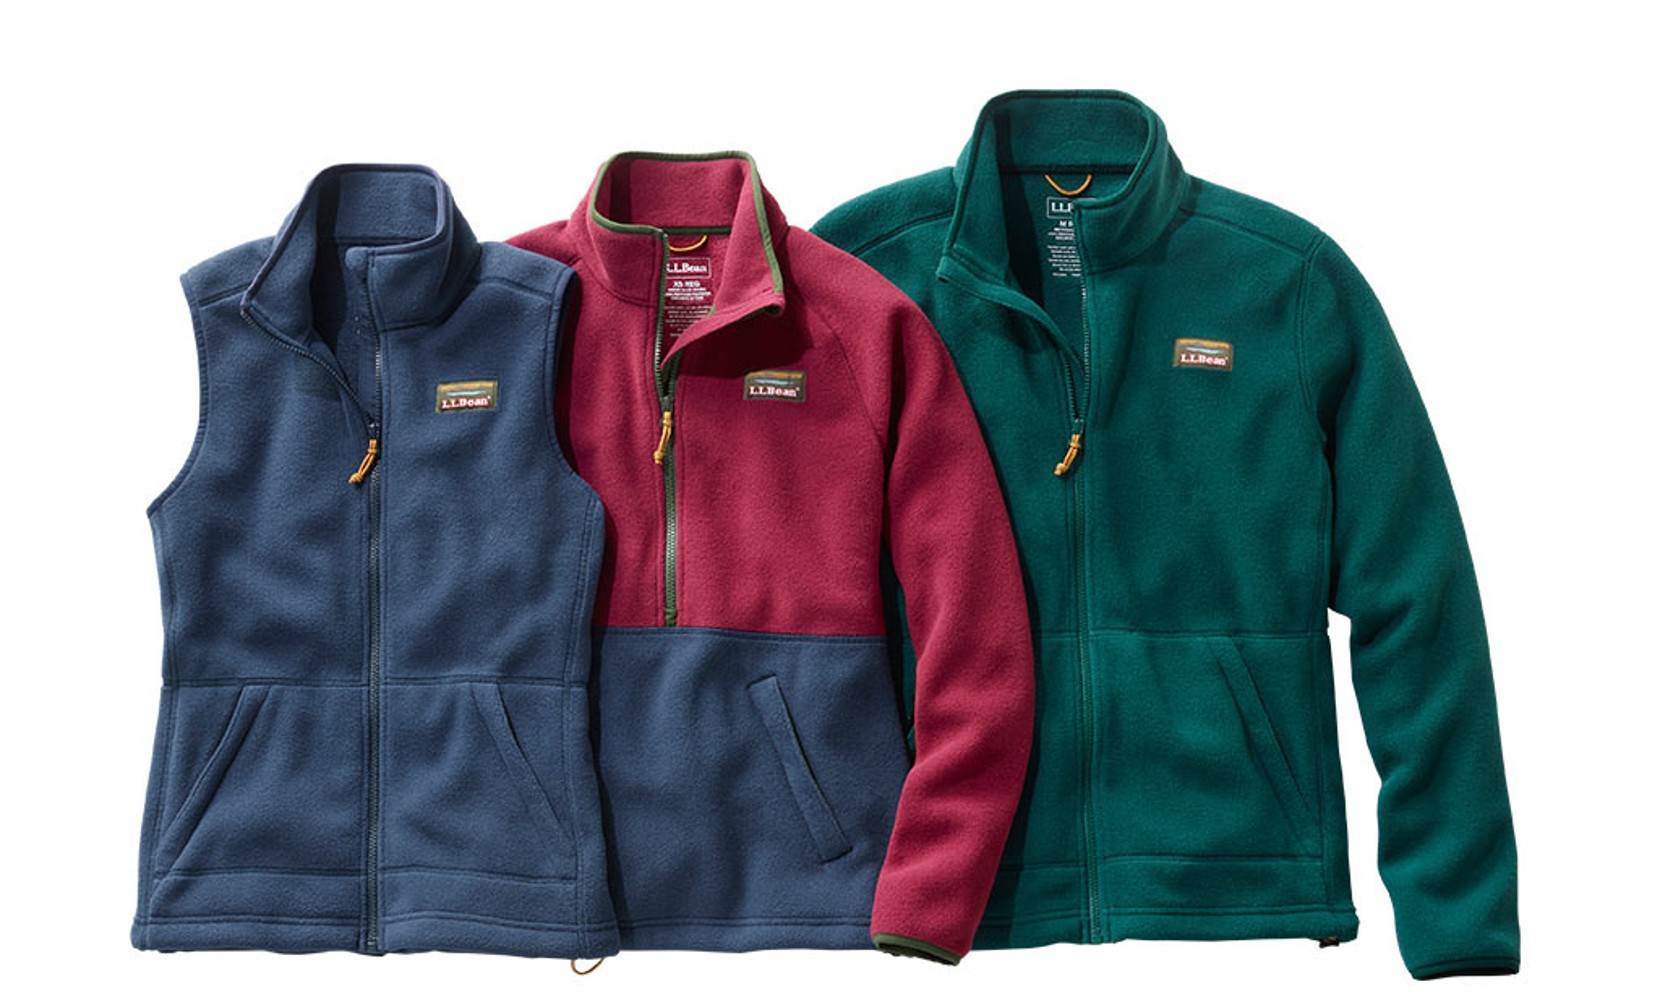 NEW Mountain Classic Fleece Cool retro details pulled from our archives ¬– in supersoft fleece that’s 100% recycled.